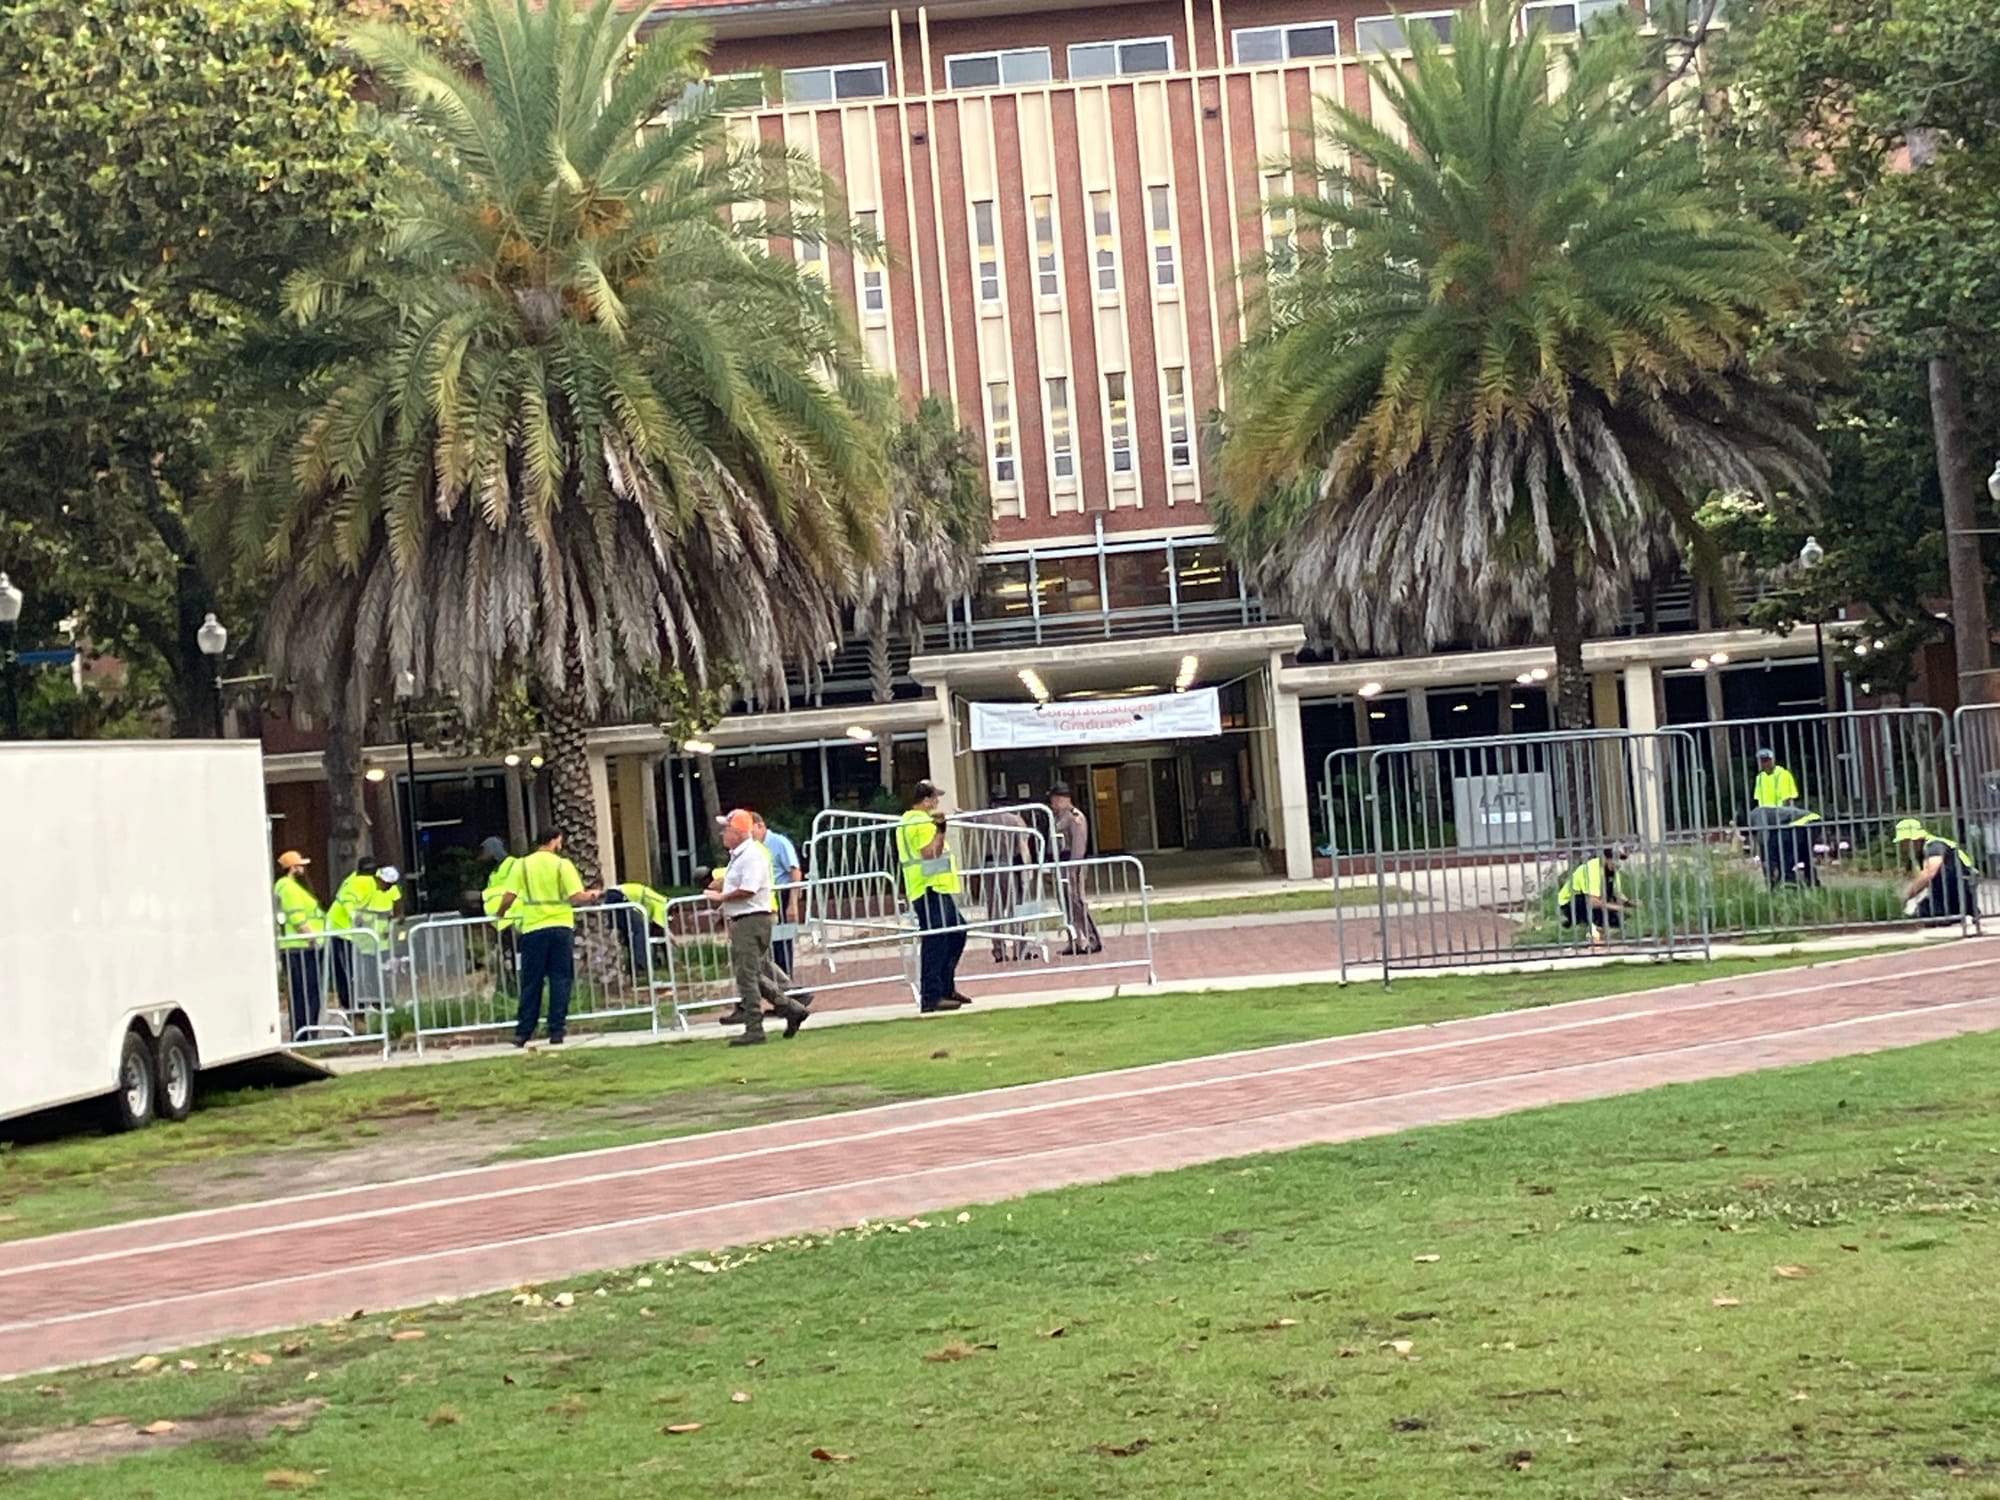 Press Conference For Gov. DeSantis Being Set Up in Front of Pro-Palestine Protesters